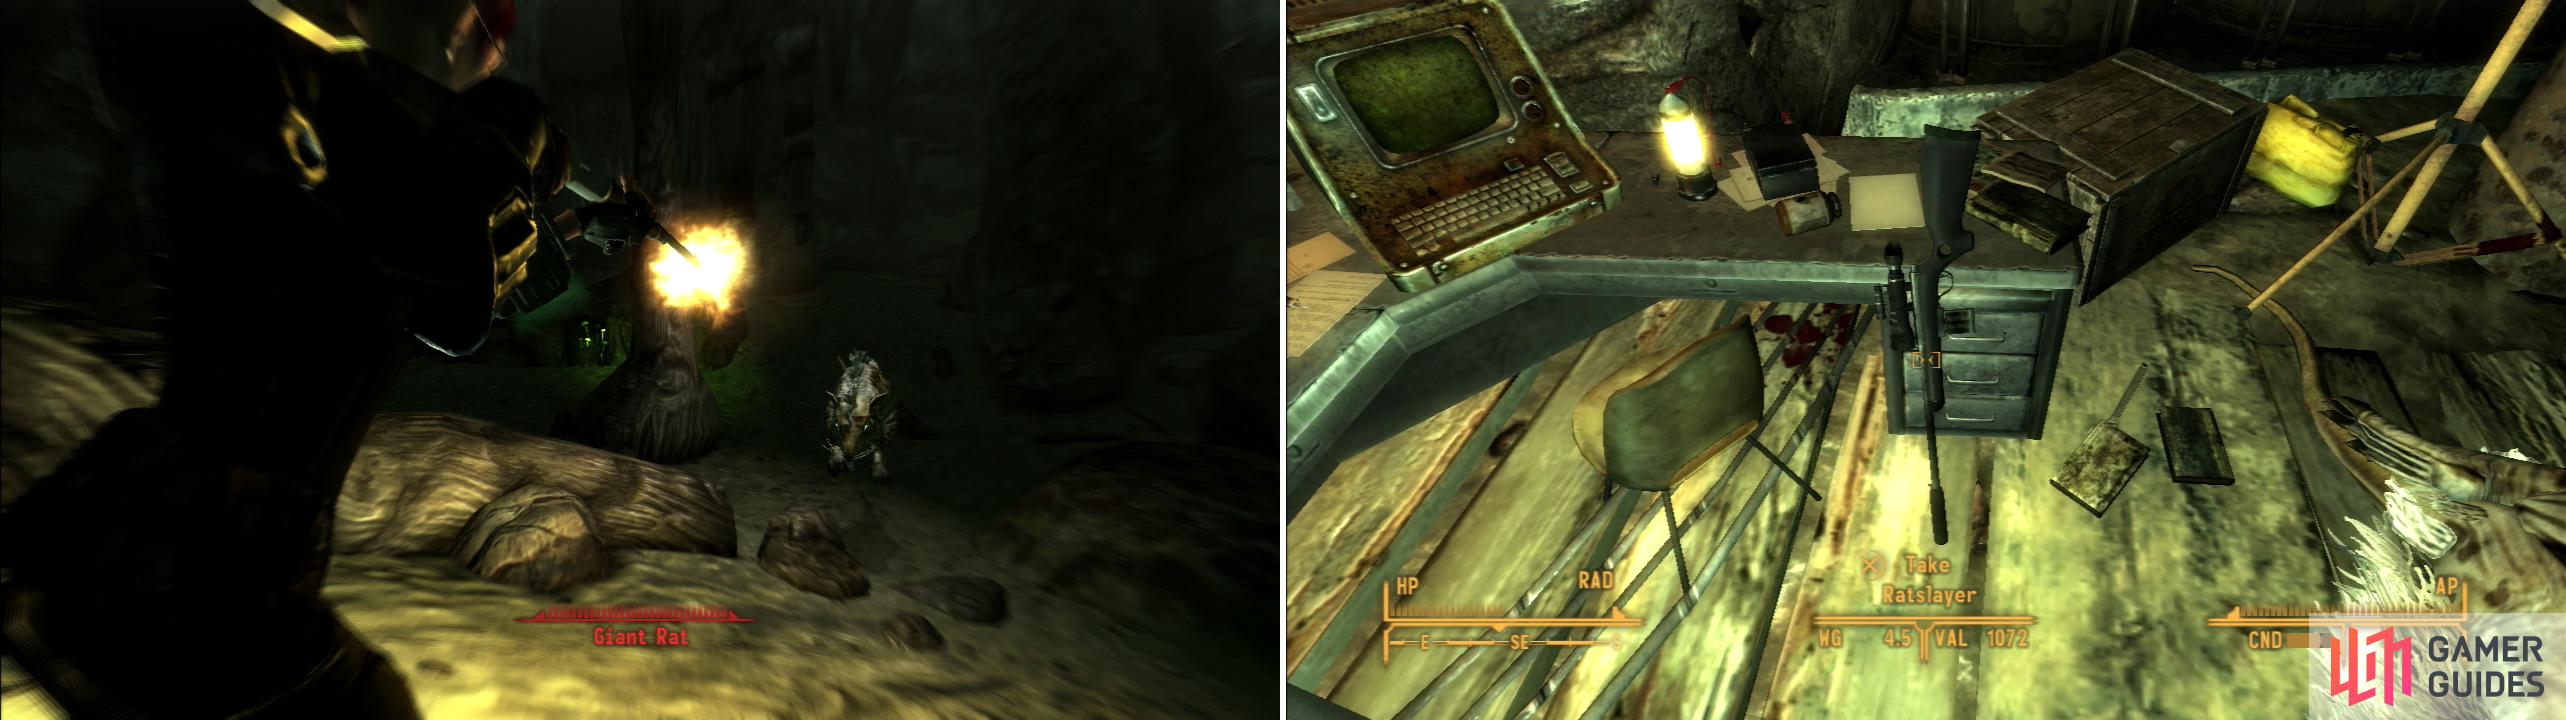 The Giant Rats in the Broc Flower Cave are stronger than usual (left), but you can get the unique Varmint Rifle, Ratslayer, inside (right).